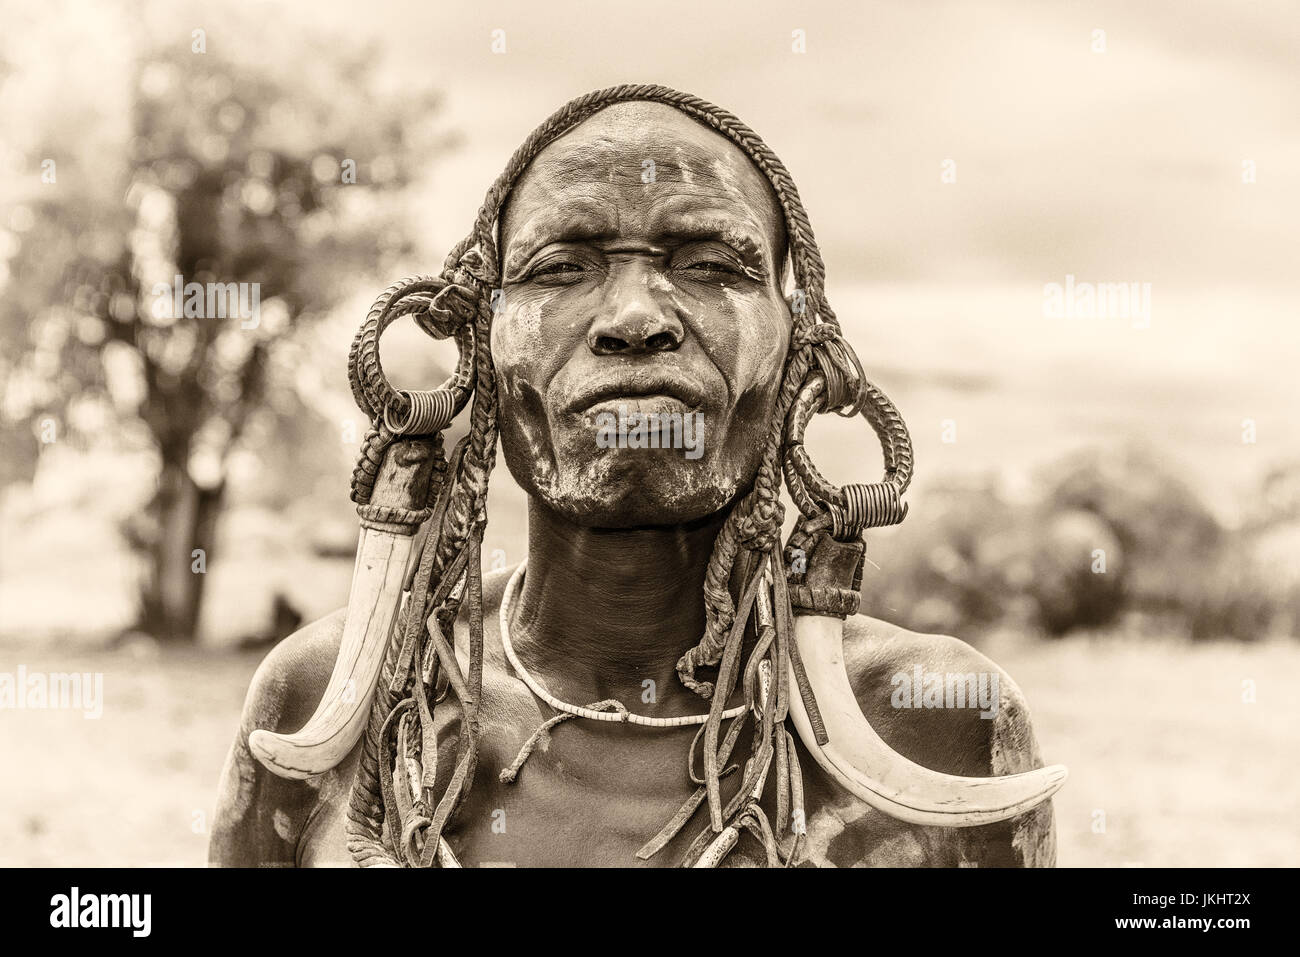 Warrior from the african tribe Mursi with traditional horns in Mago National Park, Ethiopia.  Vintage black and white processed. Stock Photo